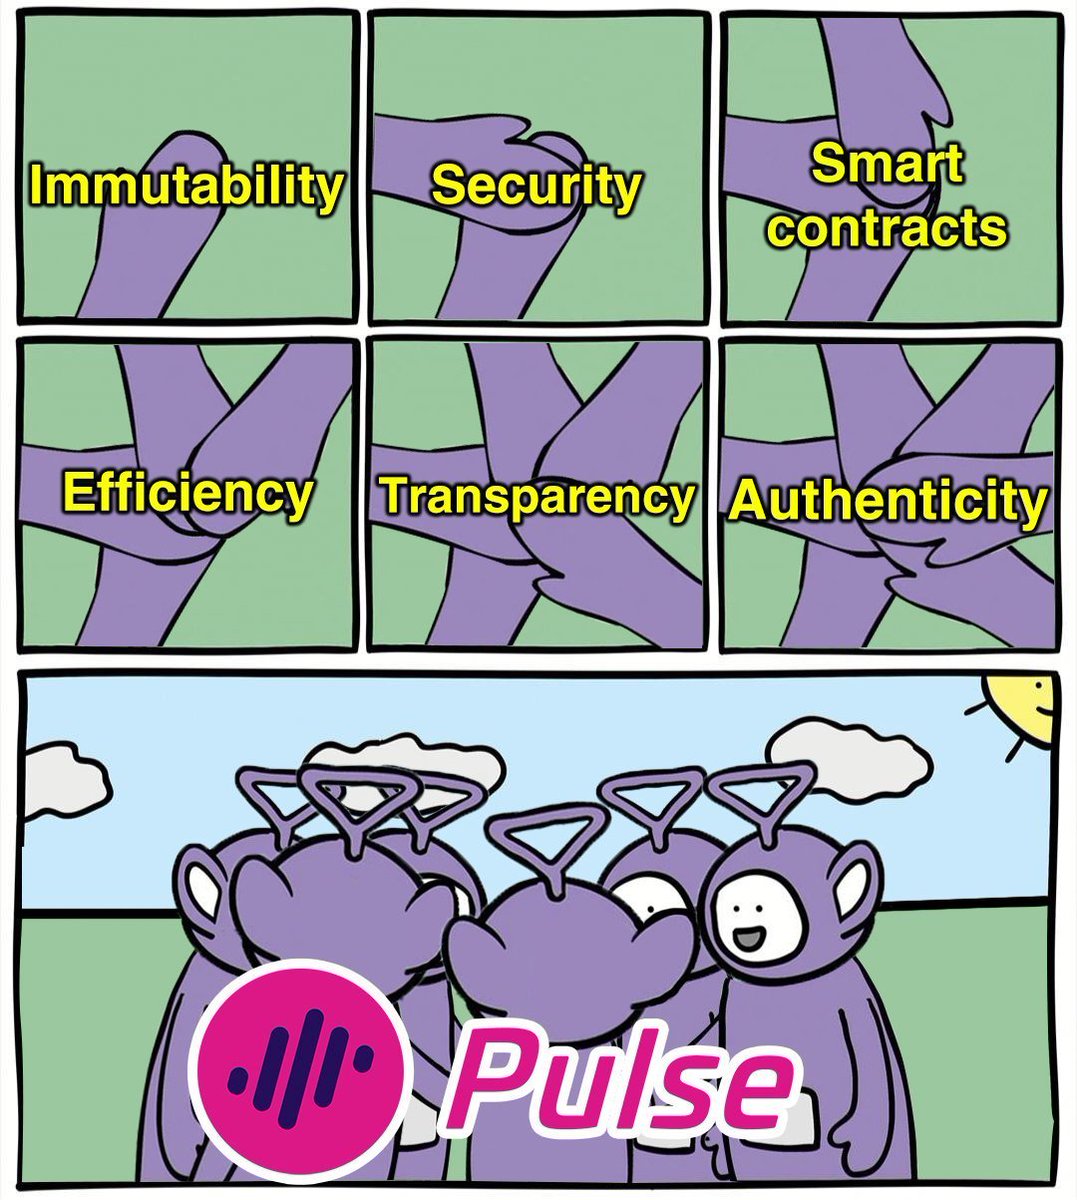 @CryptoGemsCom I have my hopes high on @PulseNetwork_ 🤗

Not only building a #medicalblockchain system but also developing the software to integrate and utilize medical and healthcare information.